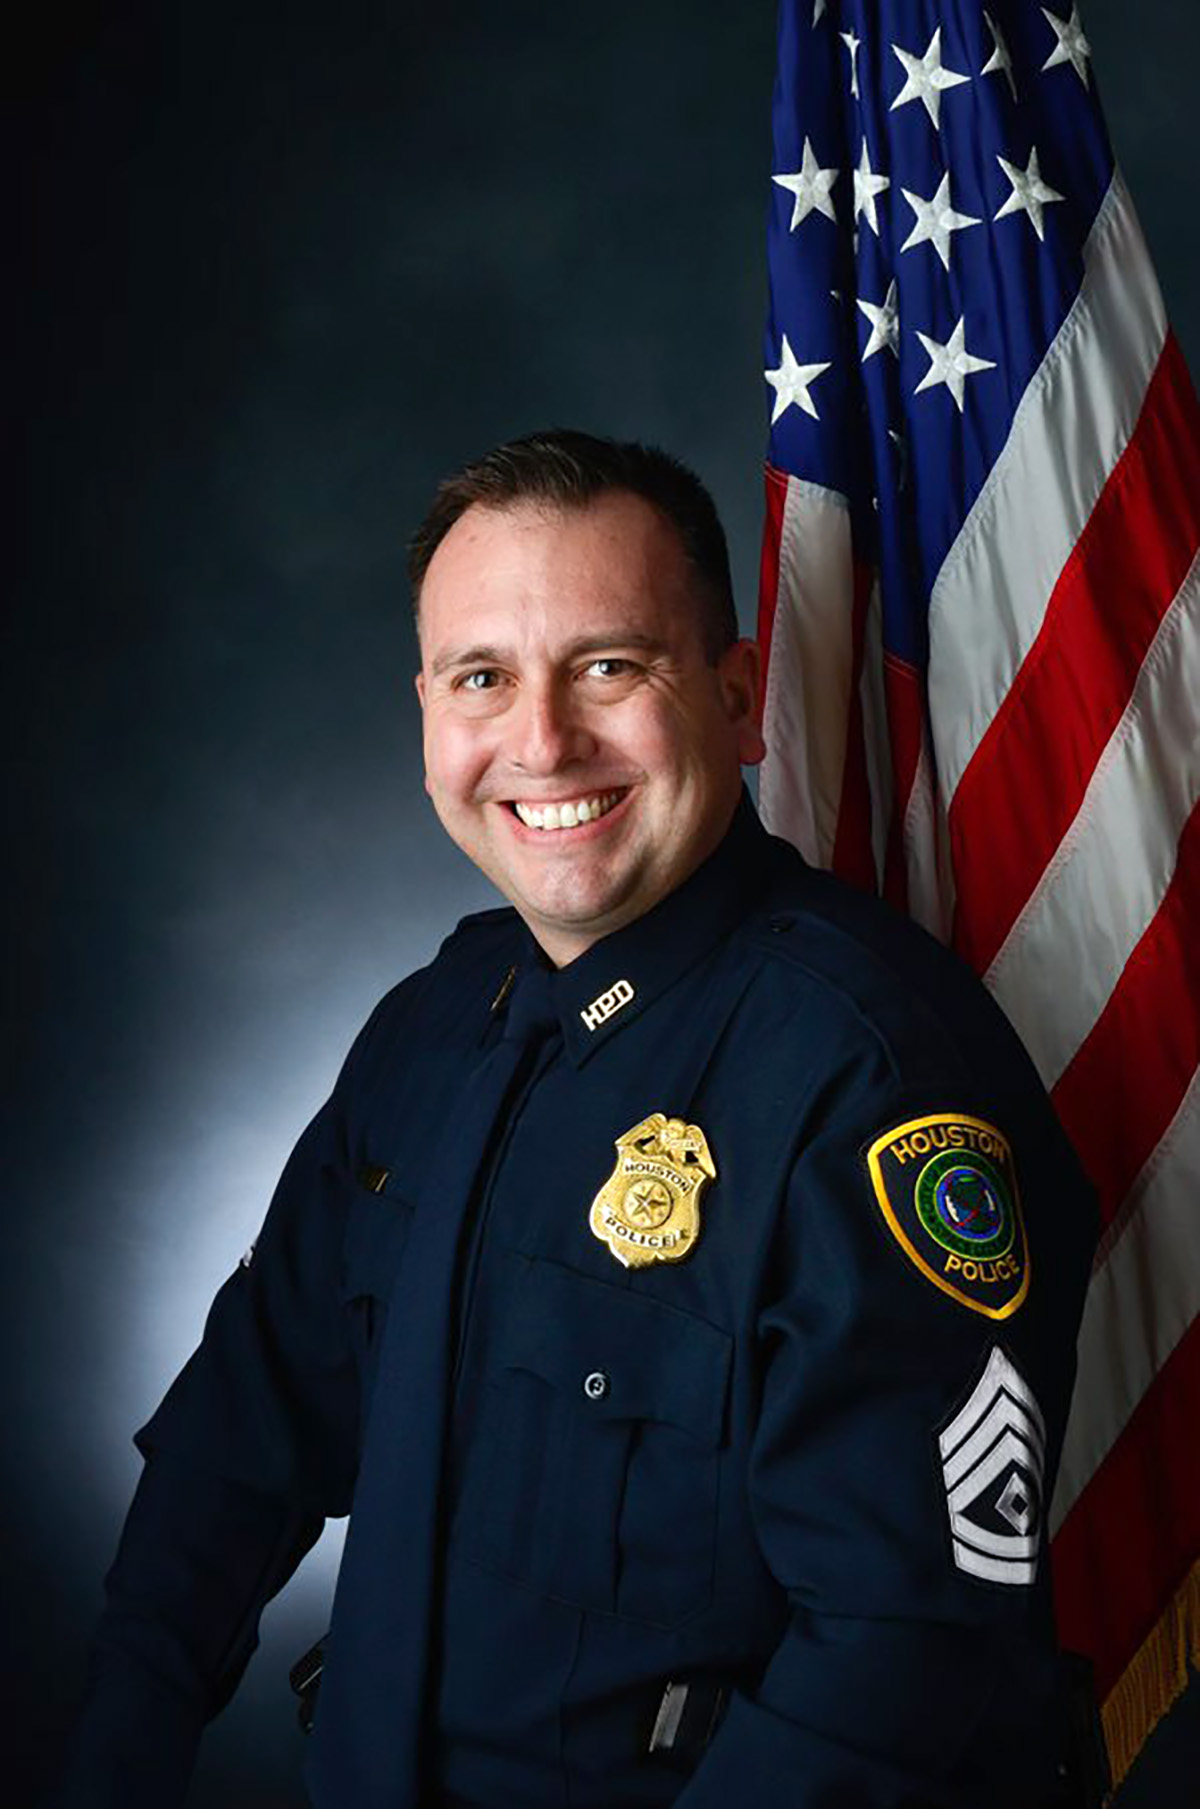 PHOTO: Houston police officer, Sgt. Sean Rios who was shot and killed on Nov. 9, 2020, in Houston.